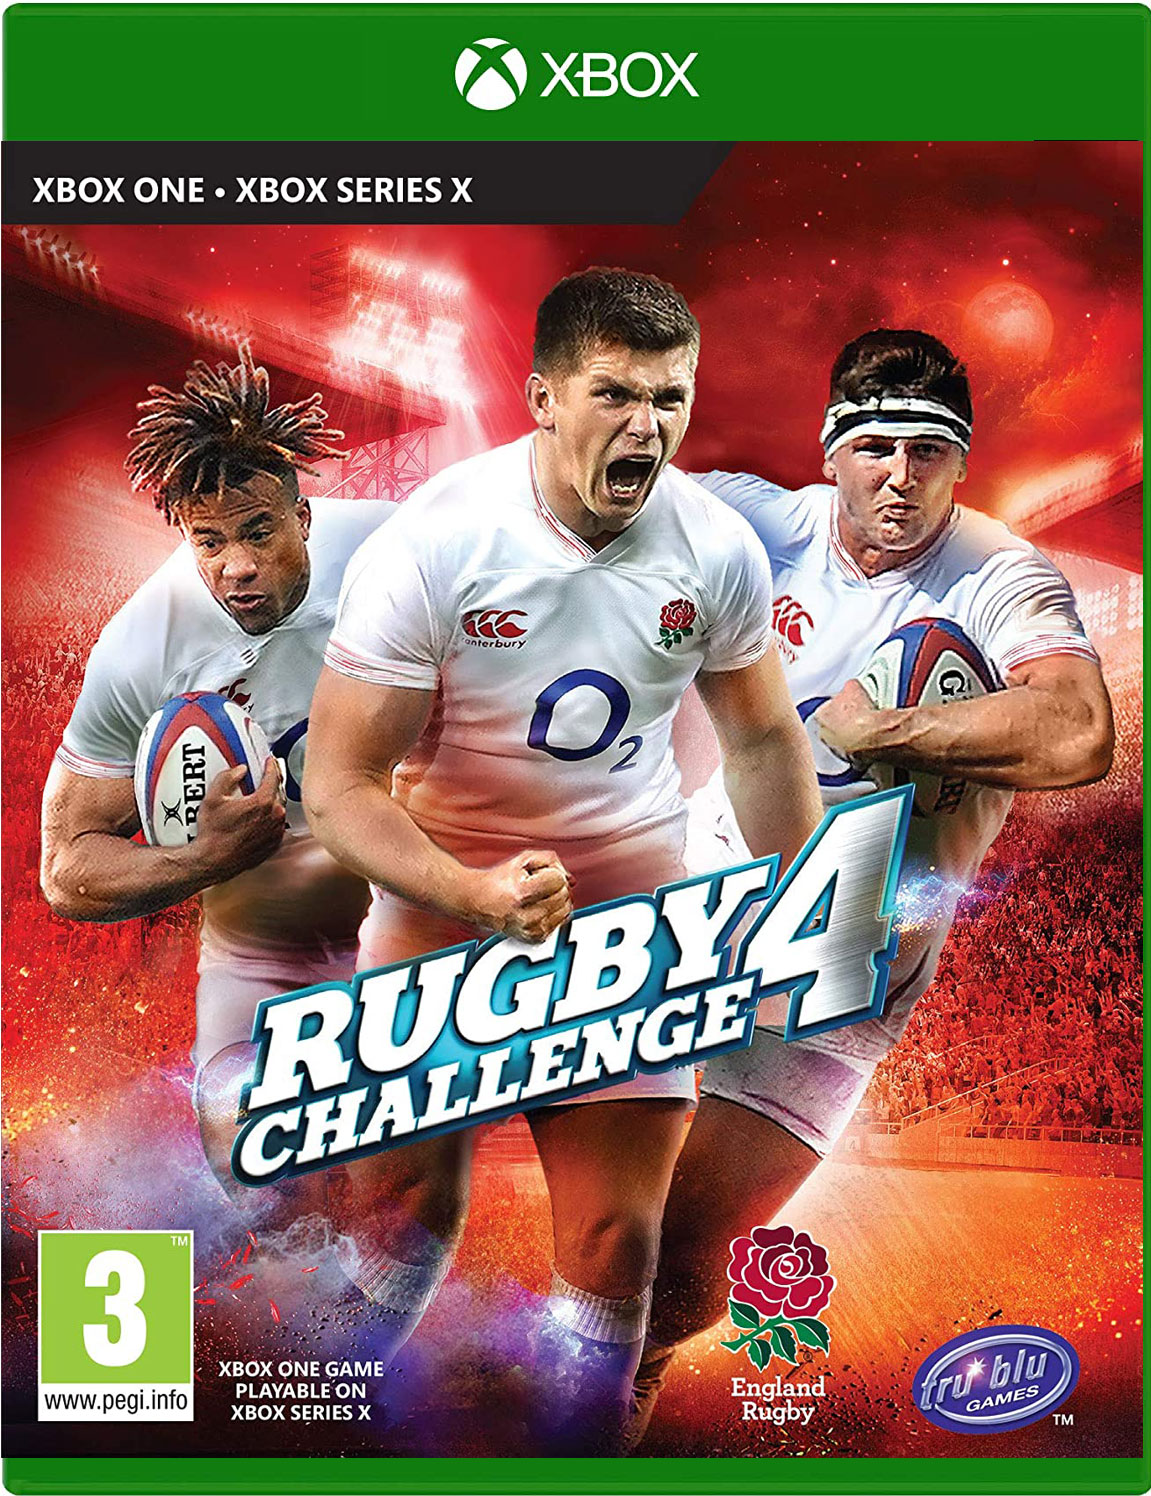 Rugby Challenge 4 (Xbox One), Wicked Witch Software